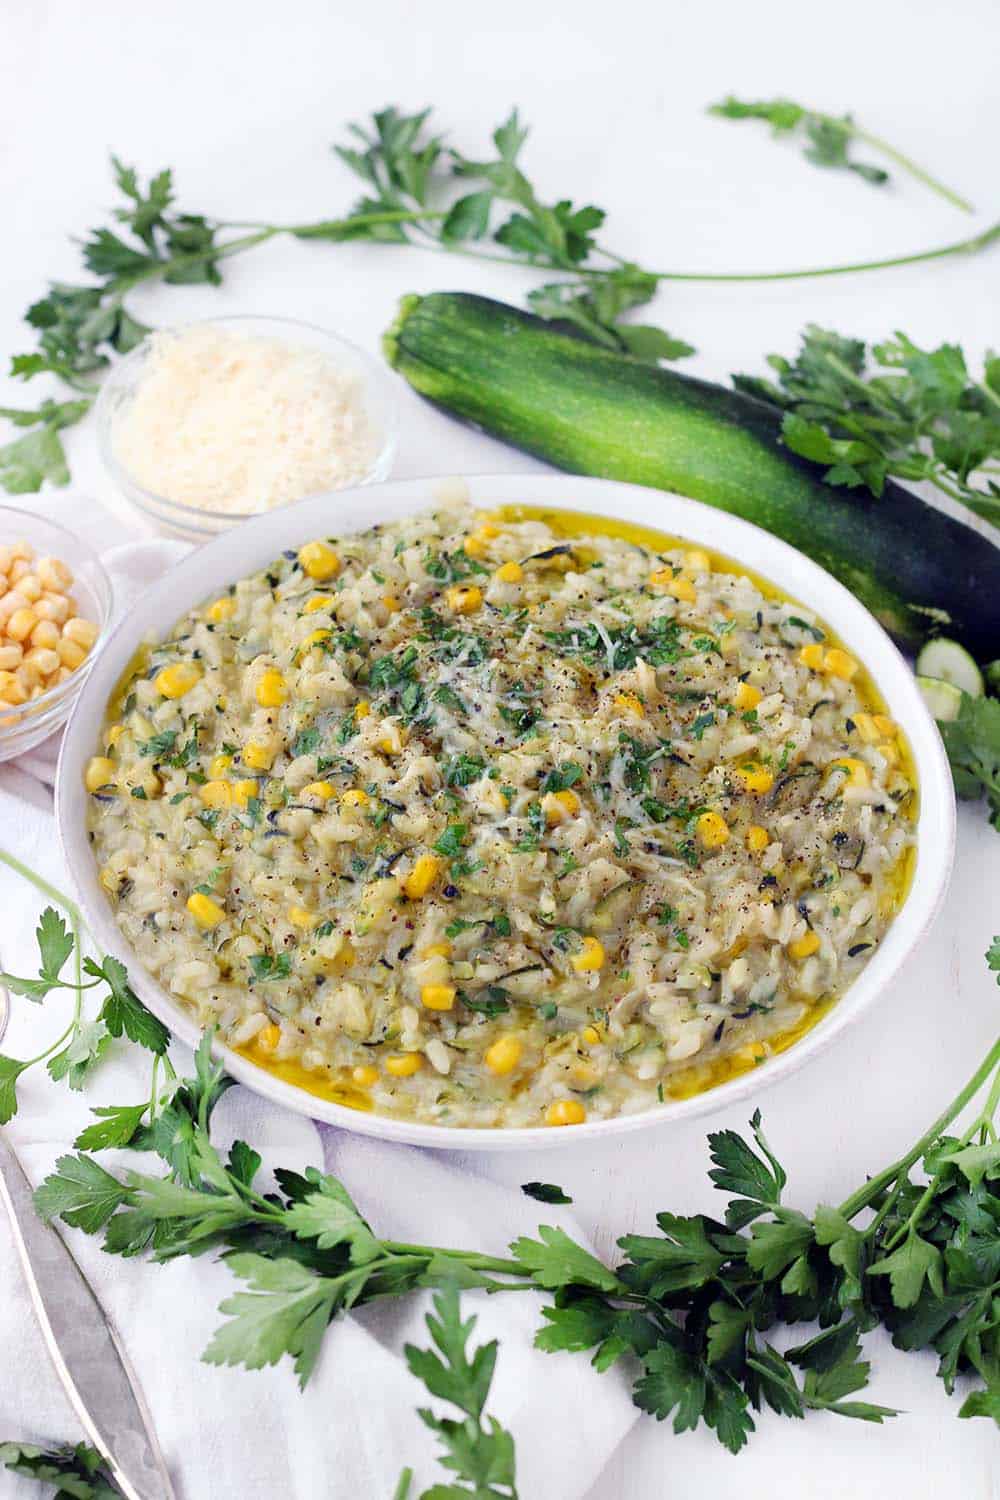 This vegetarian sweet corn and zucchini risotto recipe is such a great way to enjoy summertime vegetables! The zucchini is grated, so it melts into every bite while still maintaining a great texture, and the corn cobs are used to add flavor and starch to the broth base. The leftovers are great for brunch served with a fried egg on top.